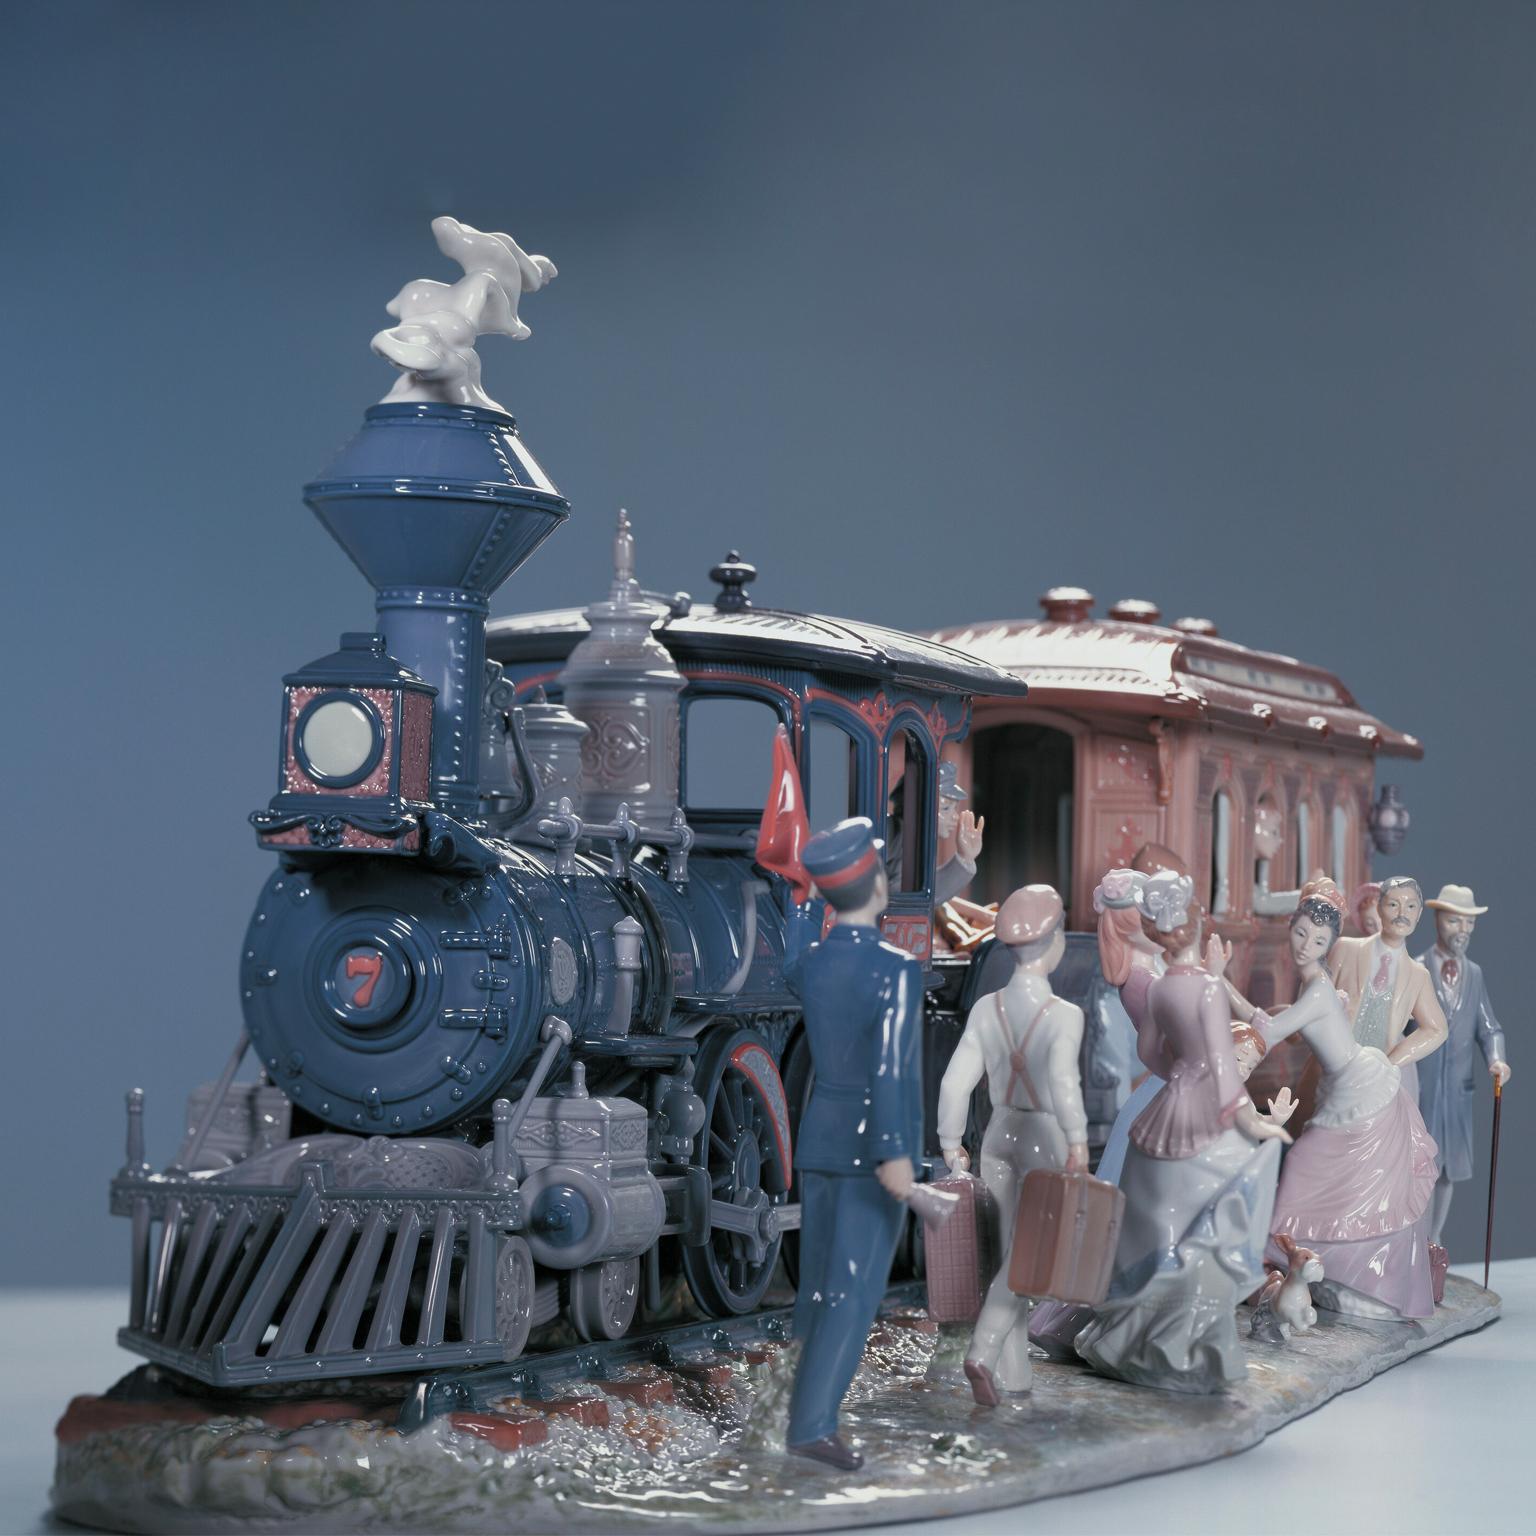 Limited edition steam locomotive with wagon and figures holding handmade umbrellas in gloss finish porcelain.
All on board! The whistle blows and the passengers are ready to embark on a exciting adventure. It is demanding challenge for the Lladró